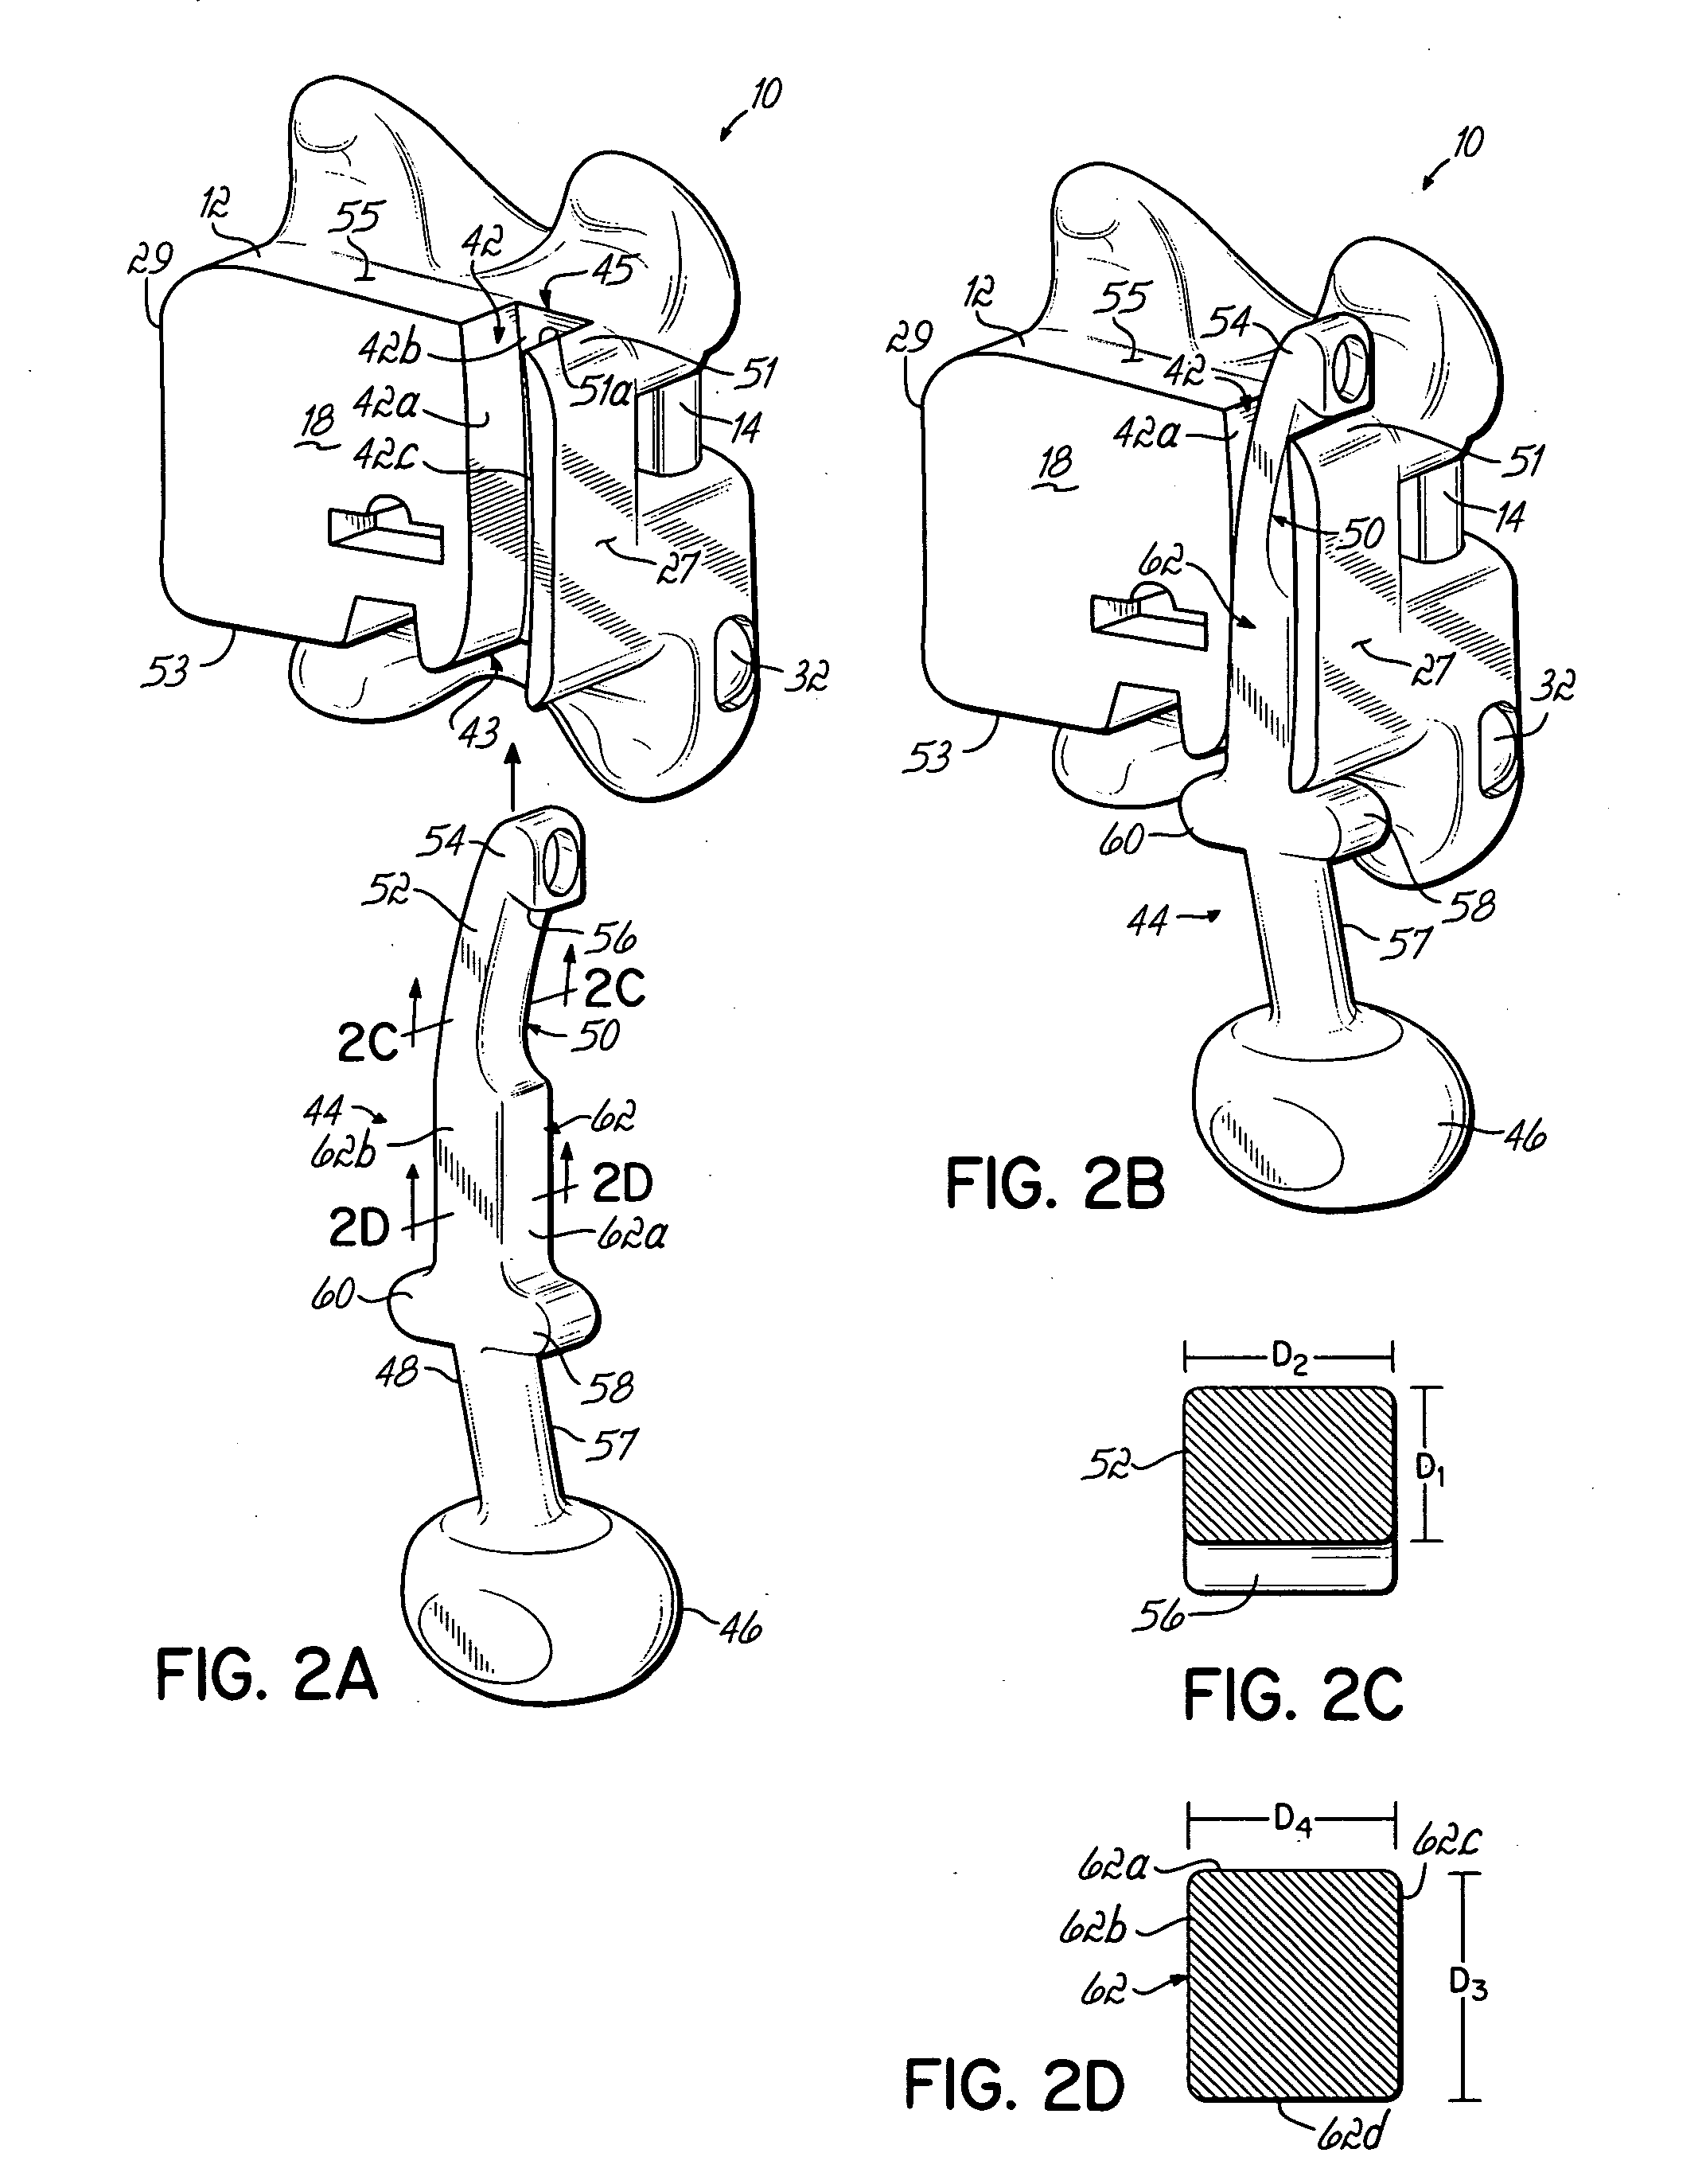 Orthodontic brackets and appliances and methods of making and using orthodontic brackets